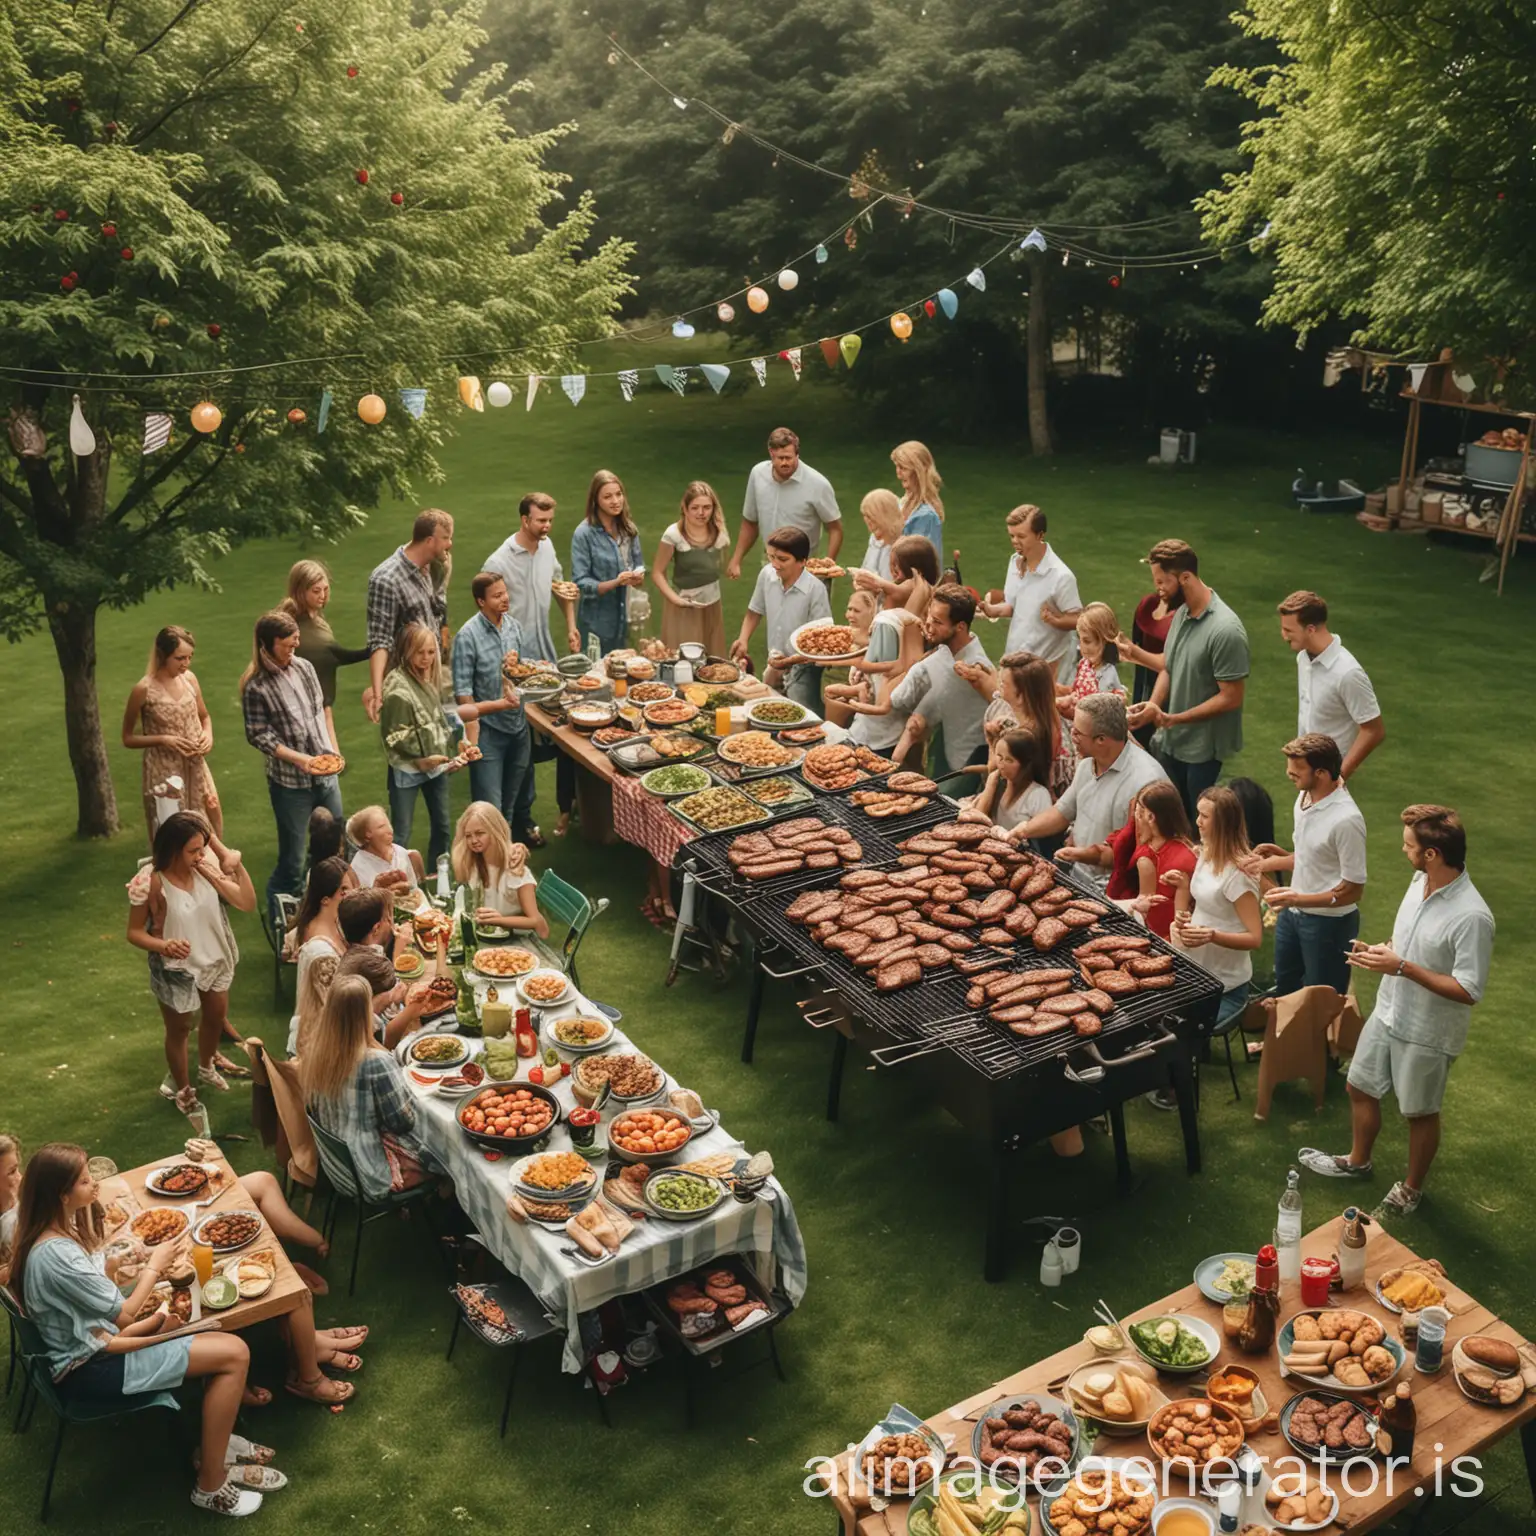 A large family barbecue party with a lot of grilled meat and a lot of family dressed modestly in a green space